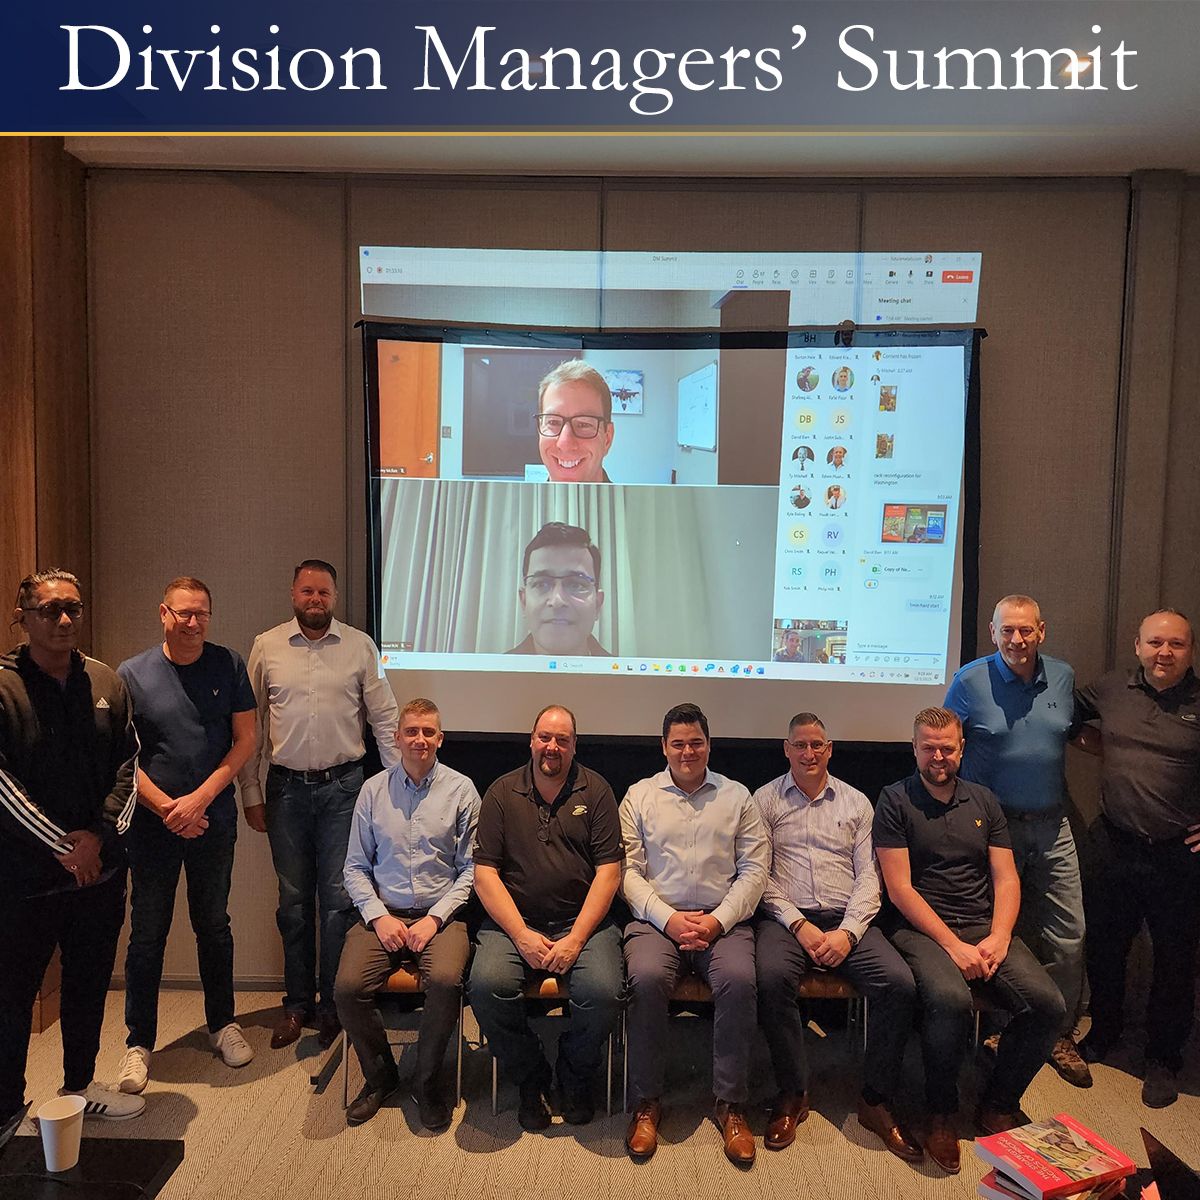 Extrusions, aircraft, aerospace, metal supplier, metals Future Metals team members confer, two joining via screen, utilizing aircraft-grade metal tech - the Strategic Division Managers' Summit.